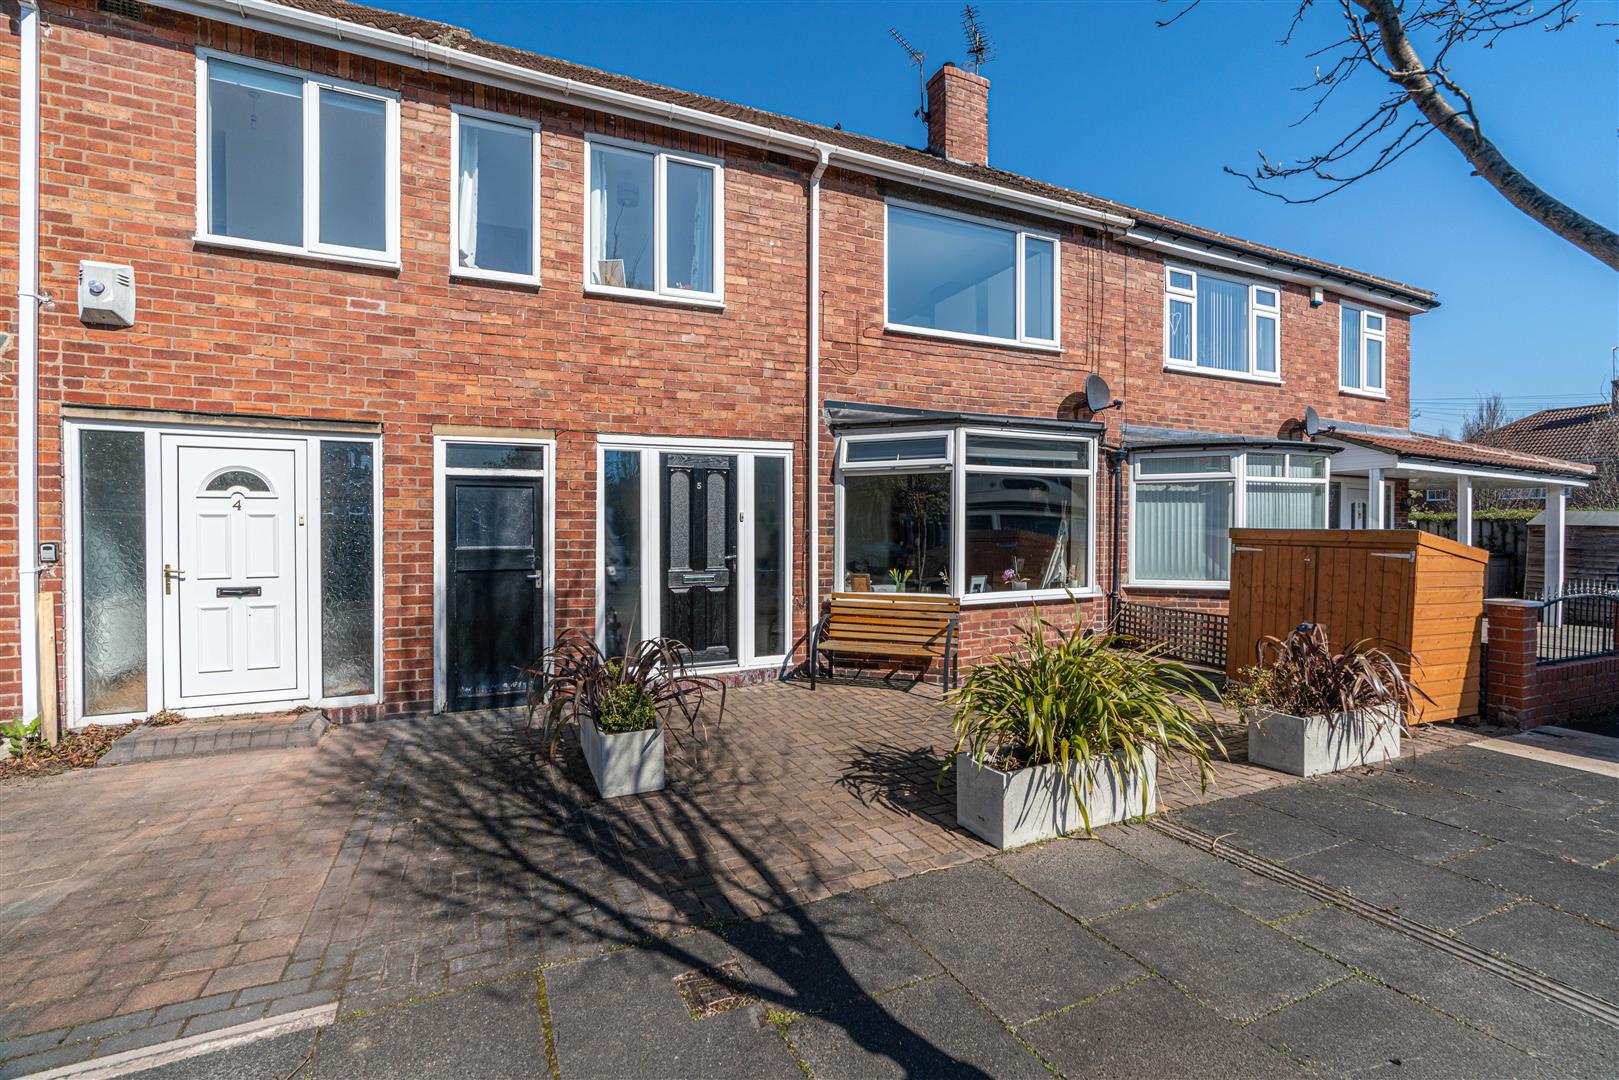 3 bed terraced house for sale in Grasmere Place, Gosforth, NE3 